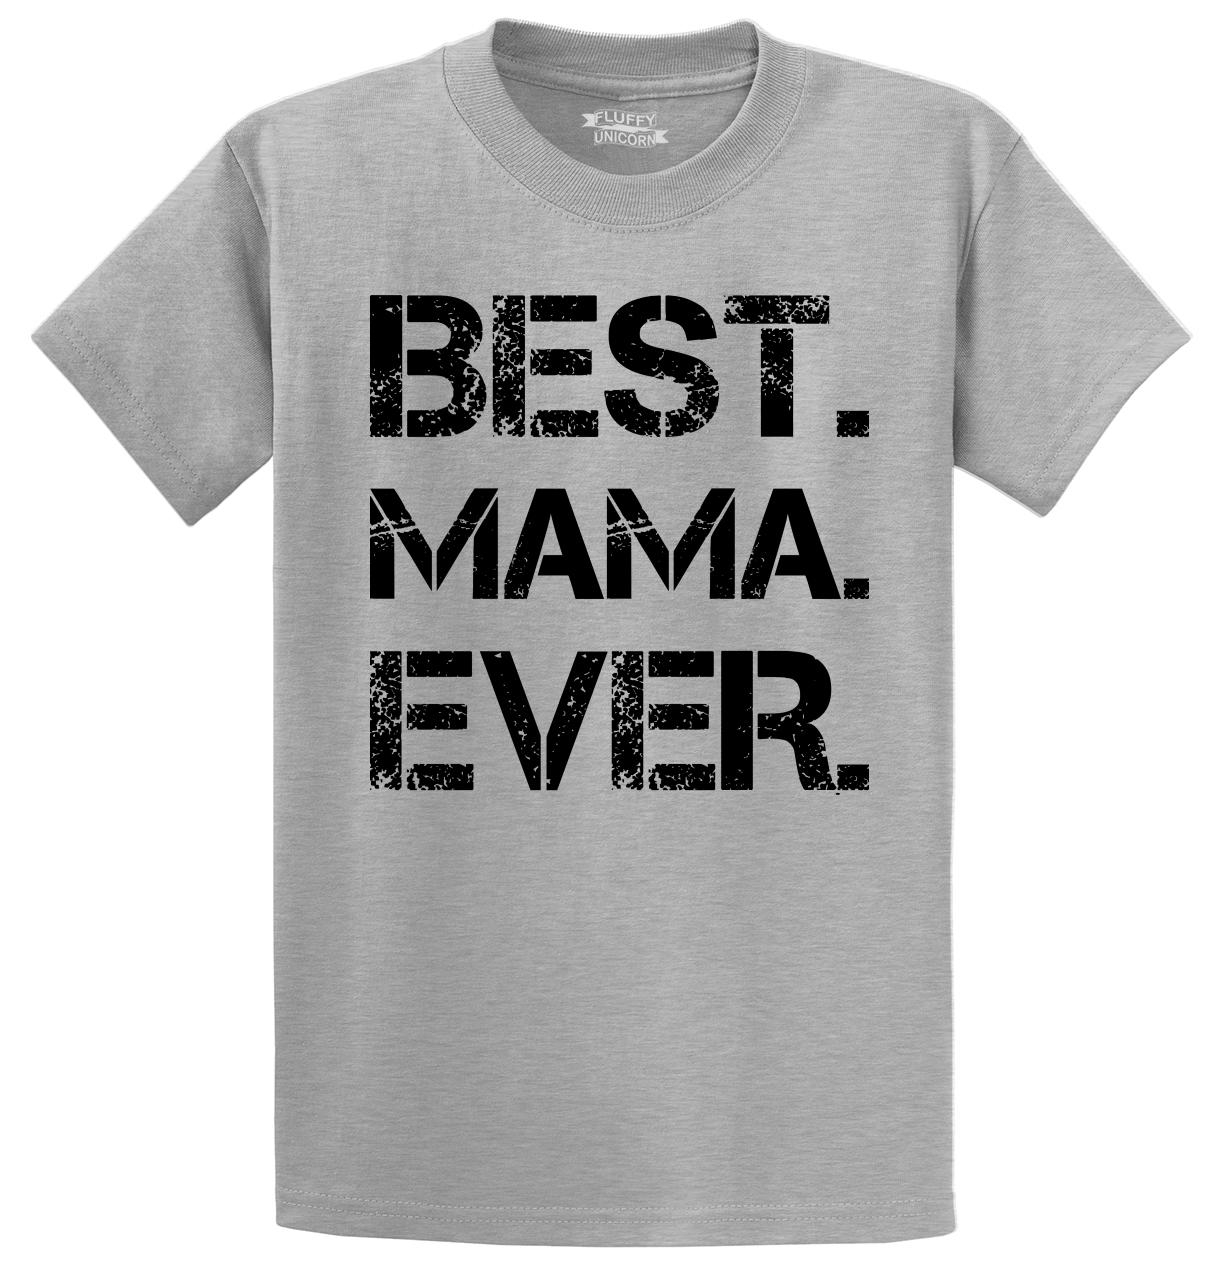 Best Mama Ever T Shirt Cute Mothers Day T New Mom Tee Shirt S 5xl 9891